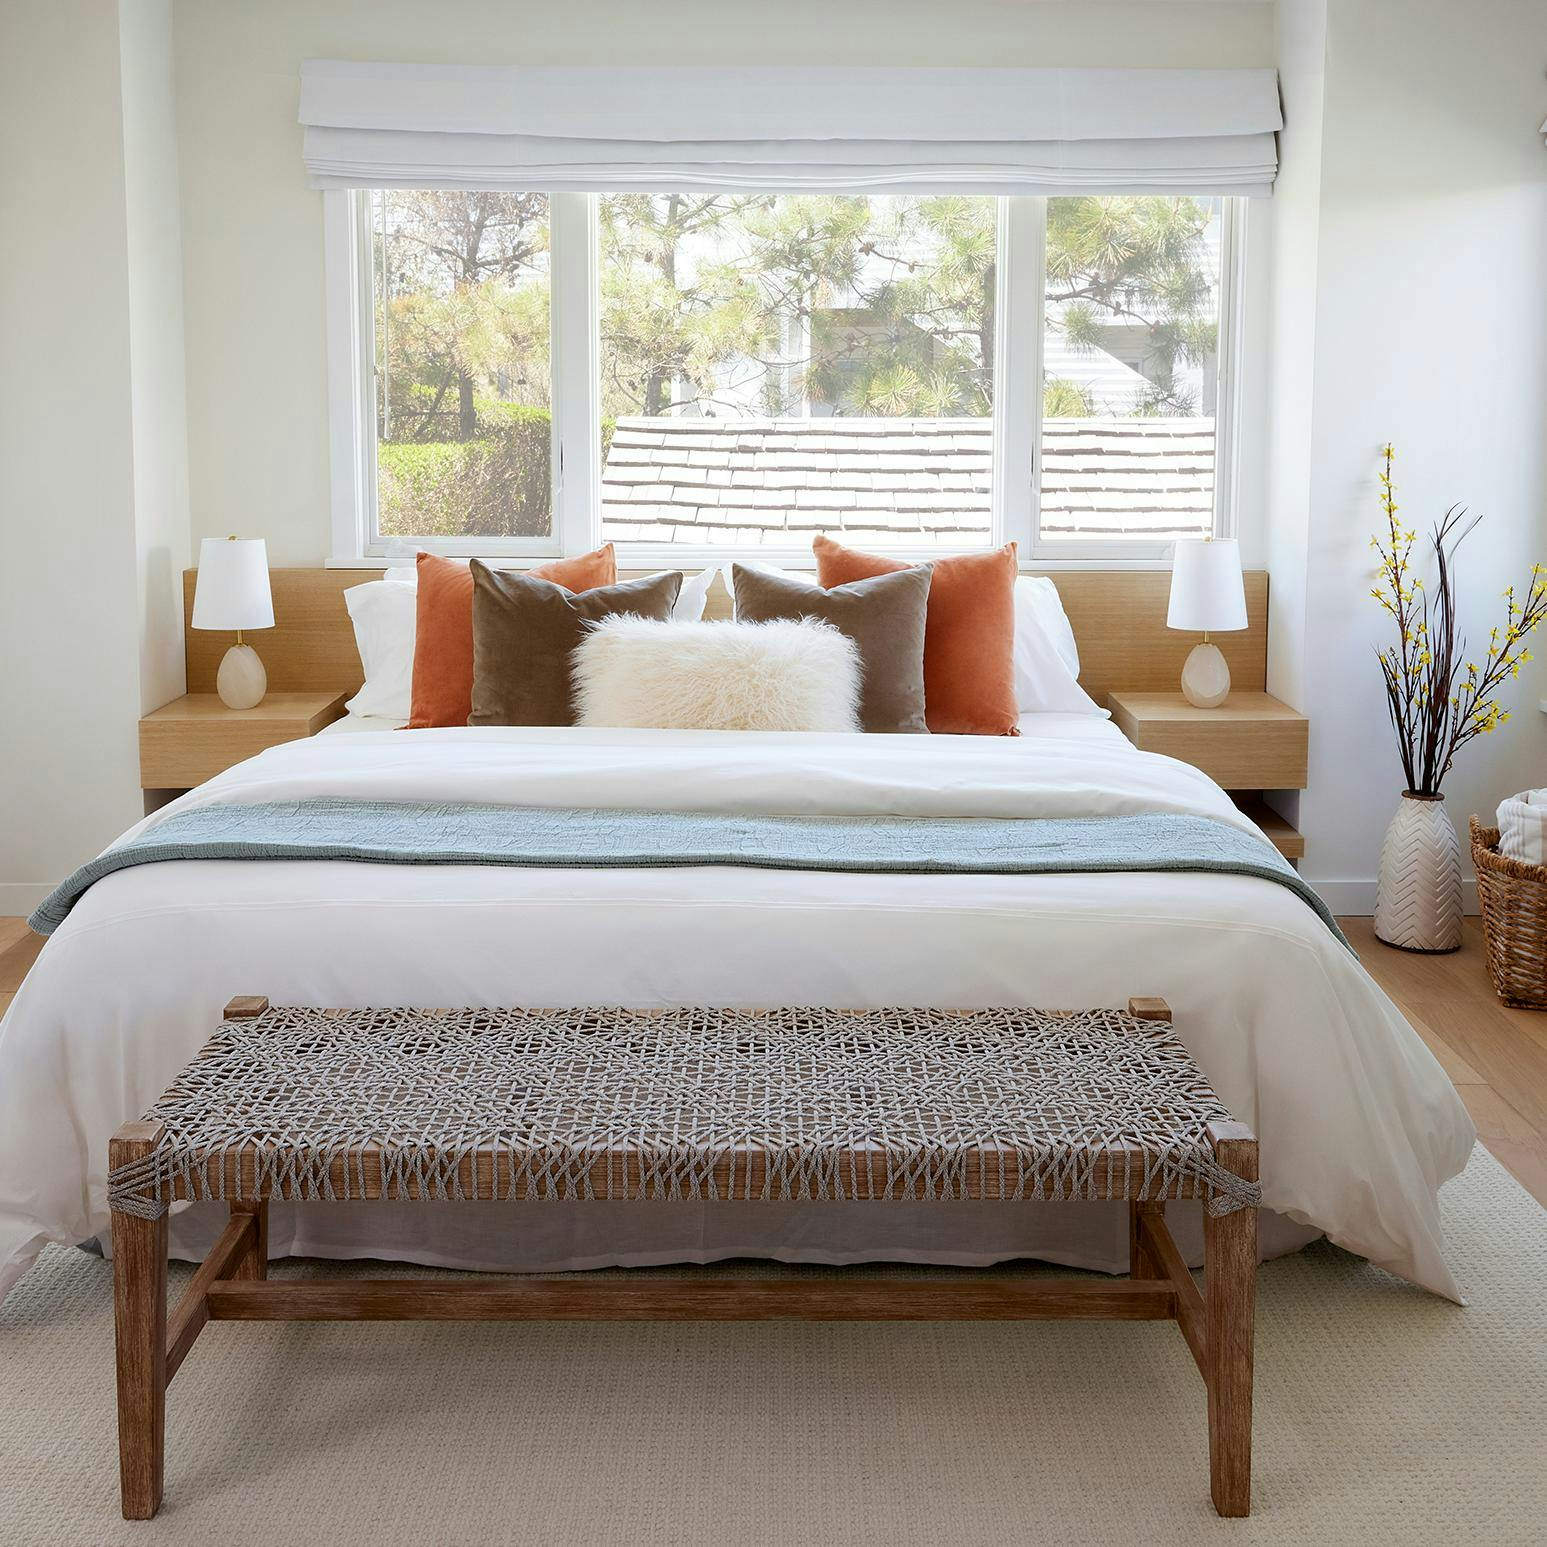 Bedroom in the Hamptons designed by Natura Interiors